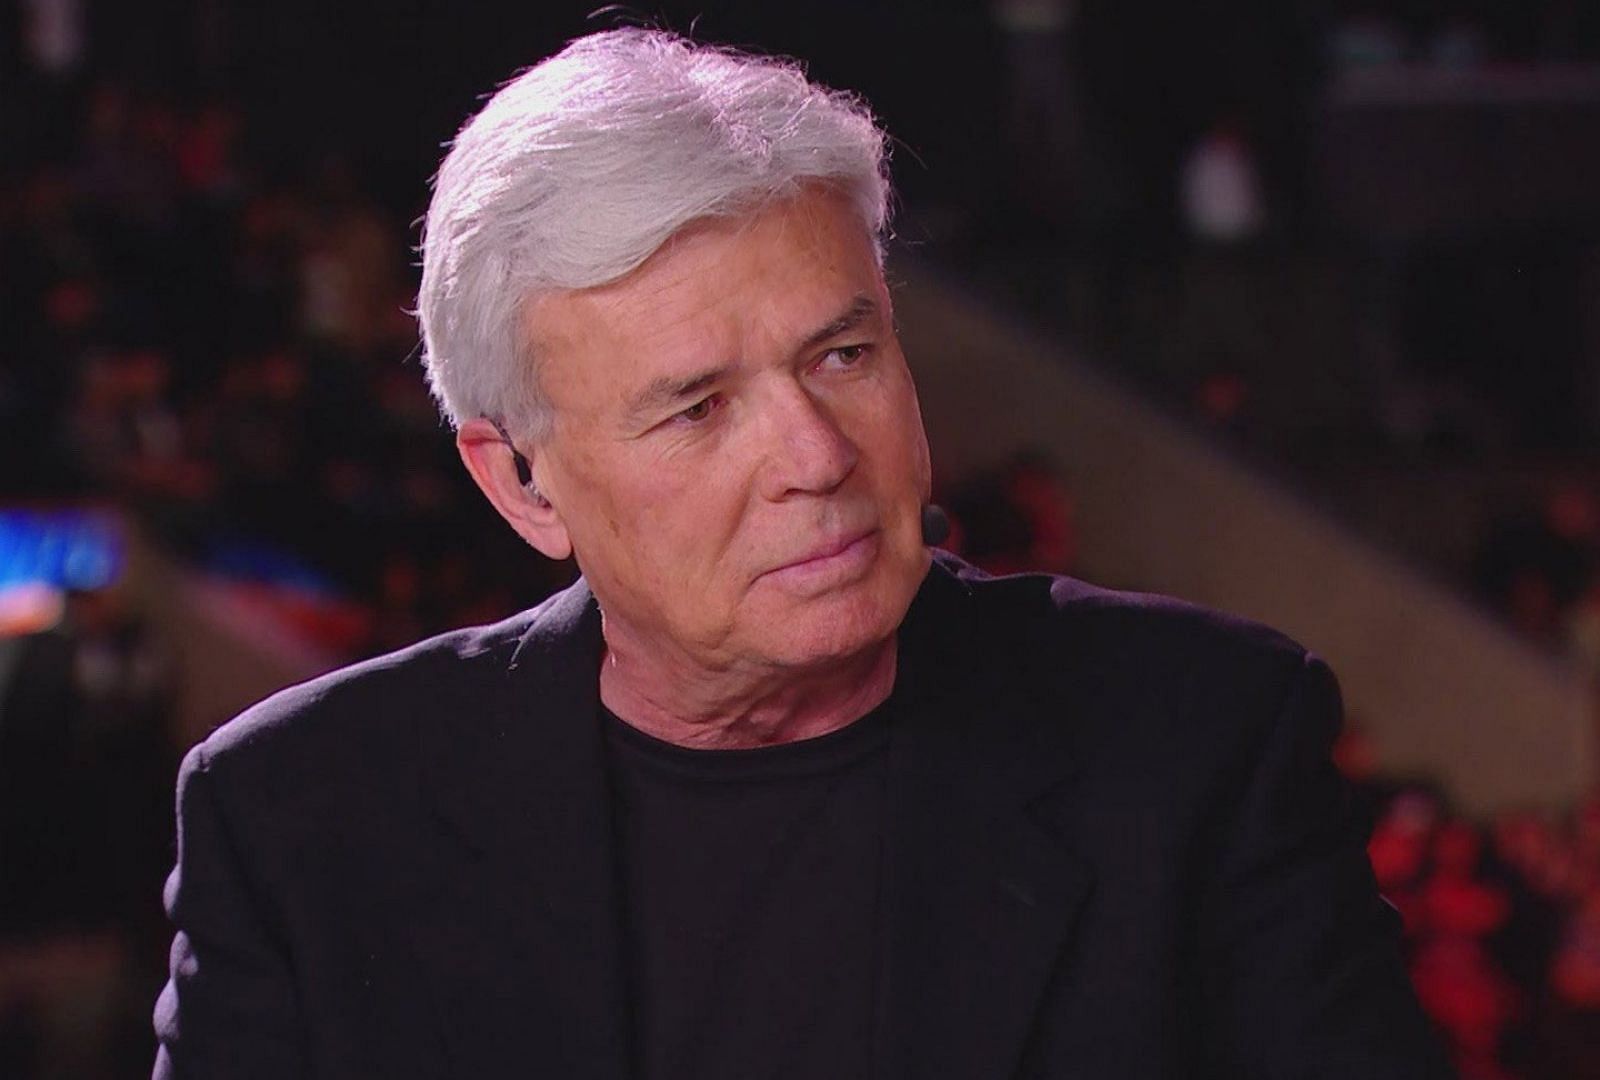 Bischoff is an influential wrestling personality.